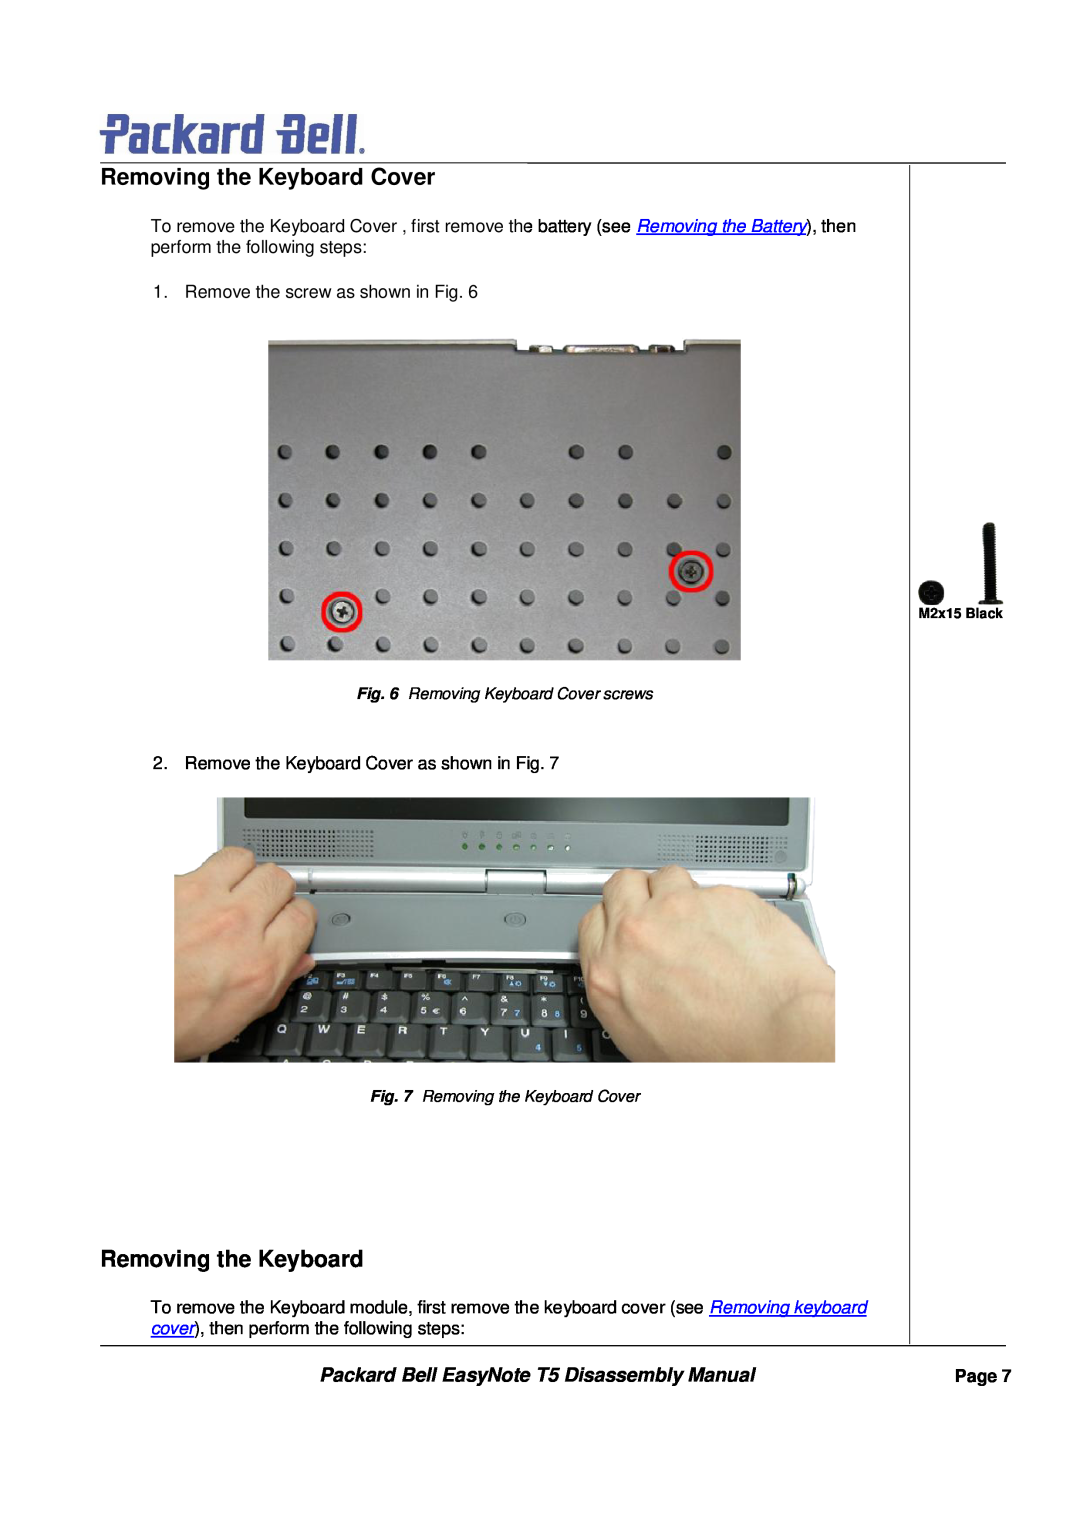 Packard Bell manual Removing the Keyboard Cover, Packard Bell EasyNote T5 Disassembly Manual 